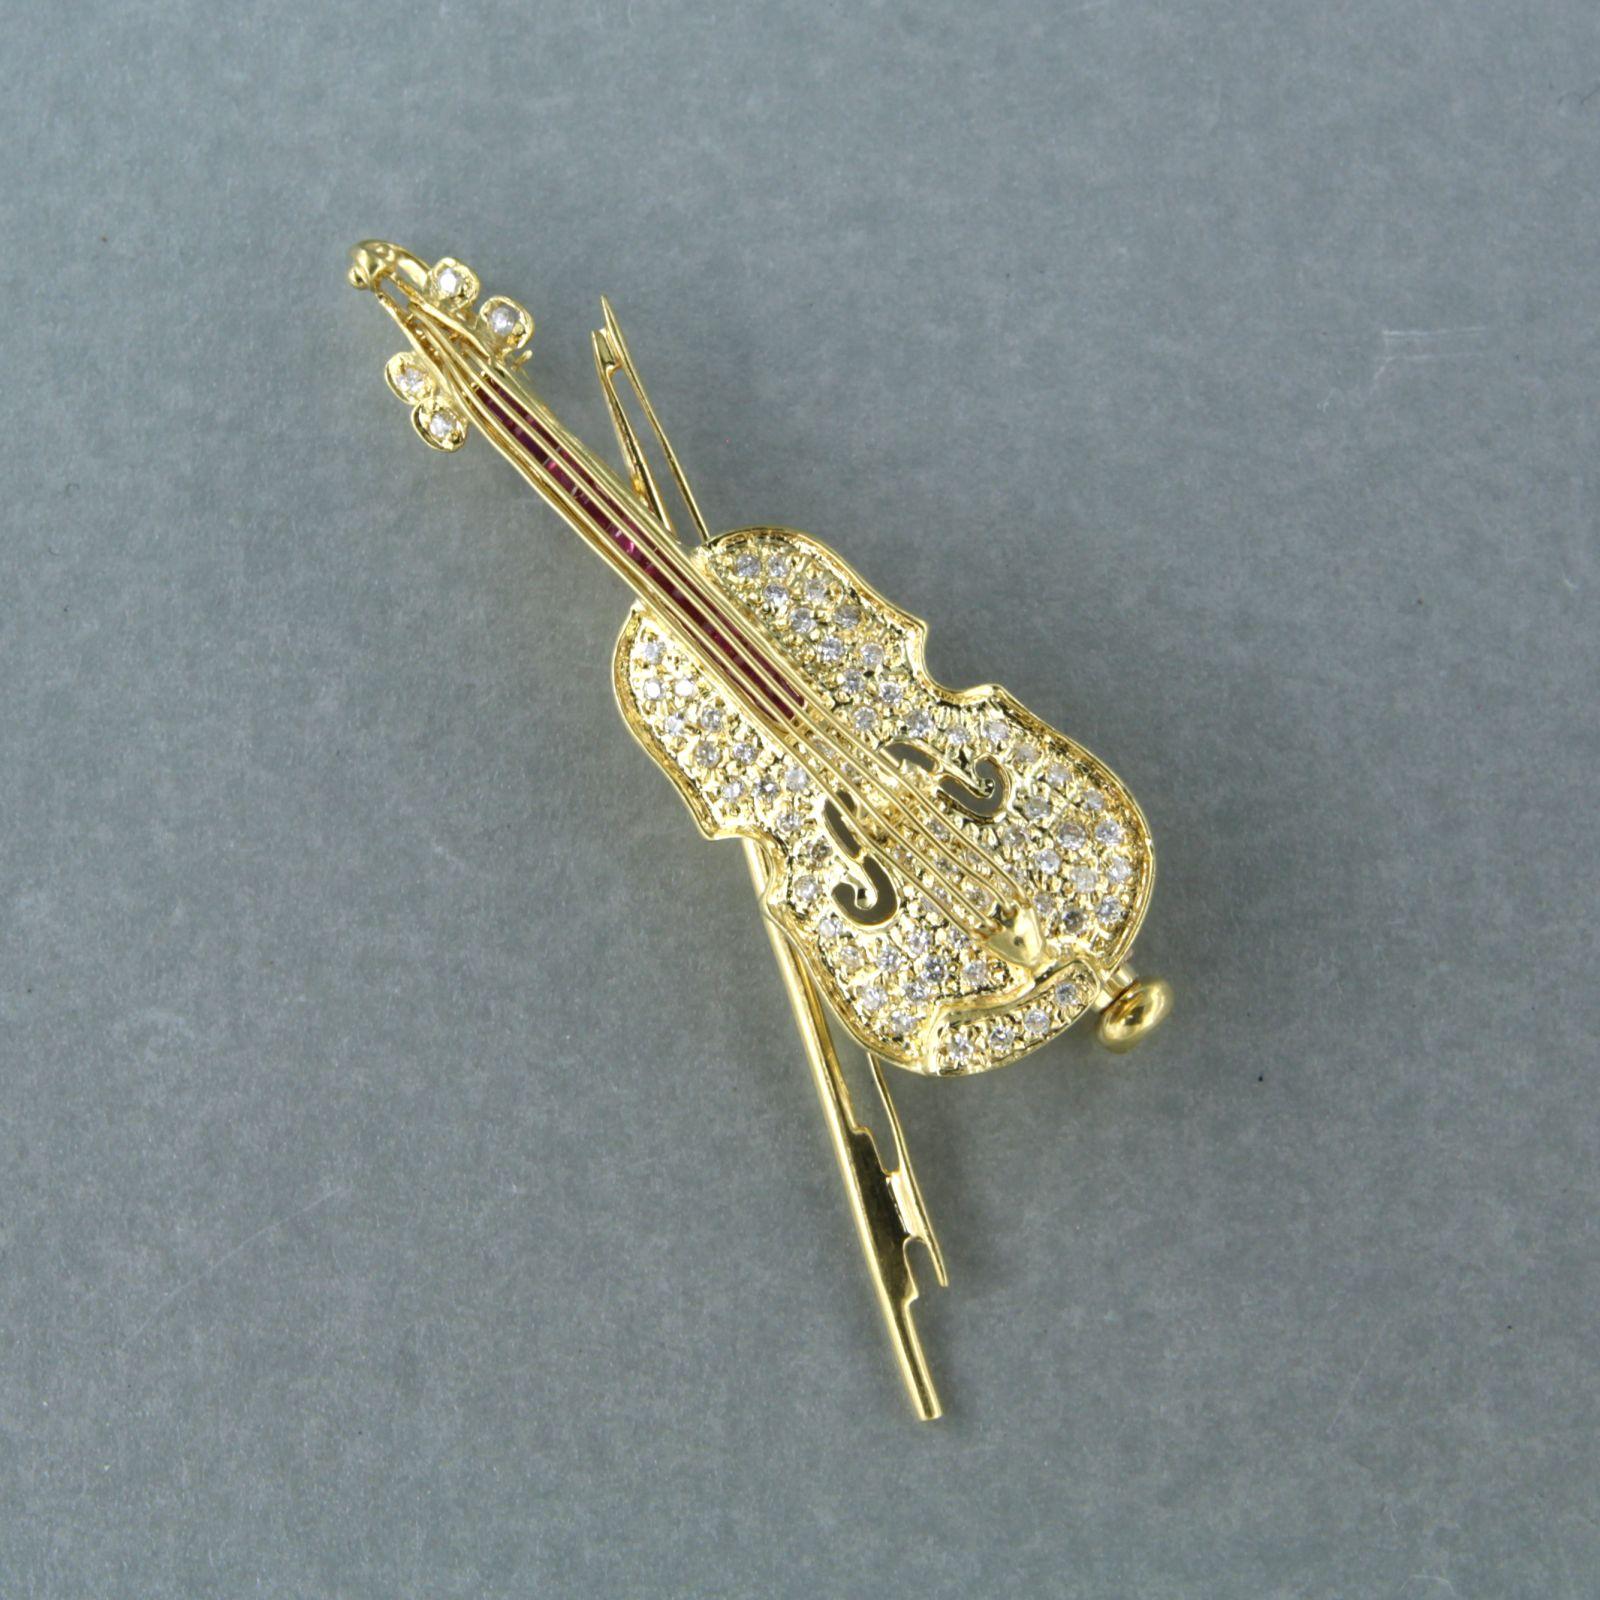 Women's brooch in the shape of a violin set with ruby brilliant diamonds 18k gold